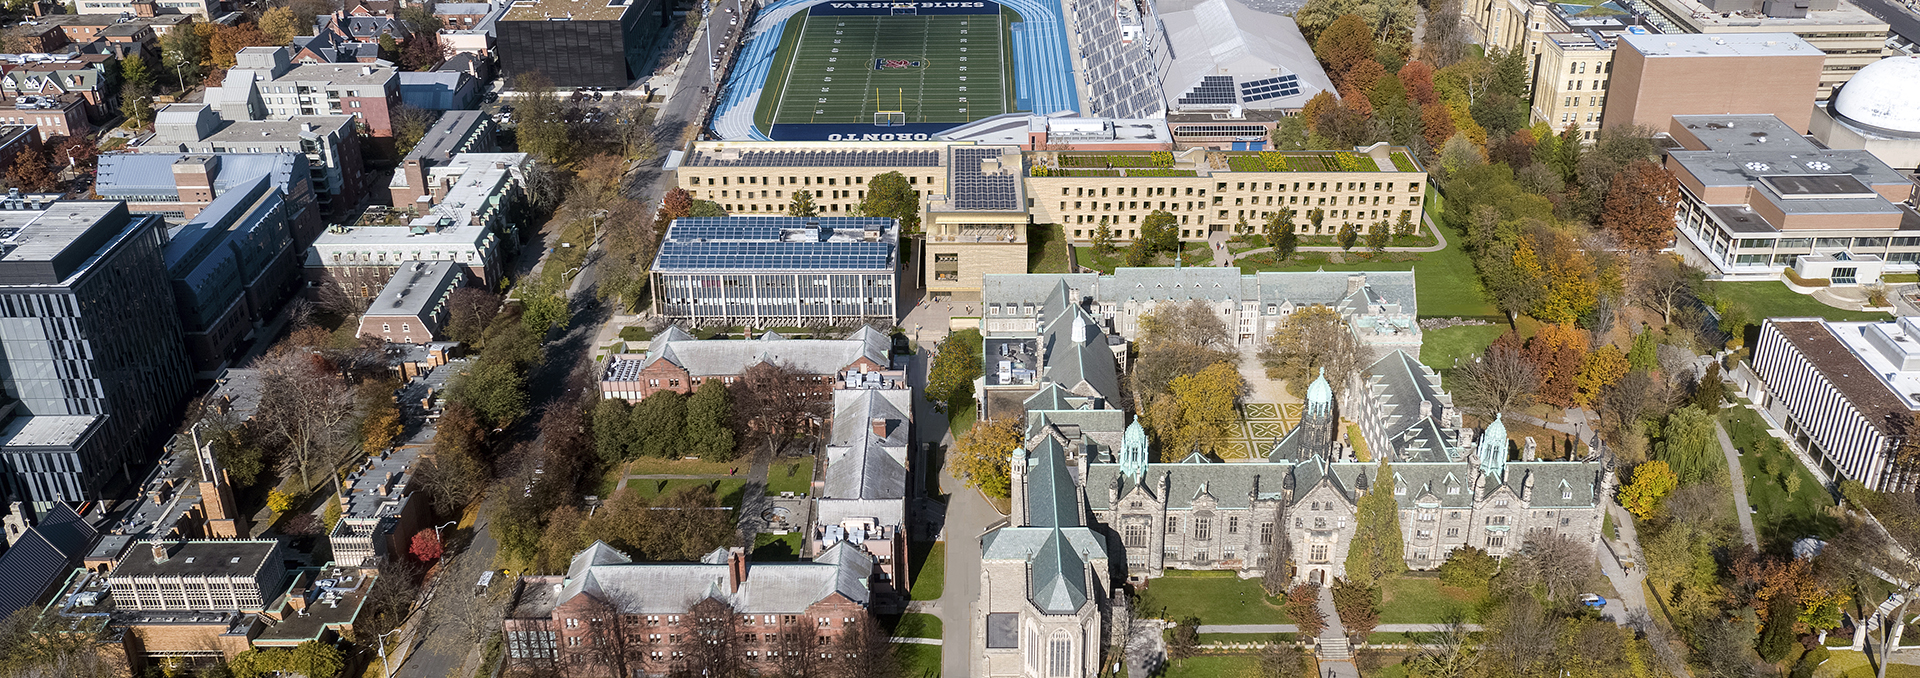 Aerial view of the Trinity campus with a rendering of the new Lawson Centre for Sustainability